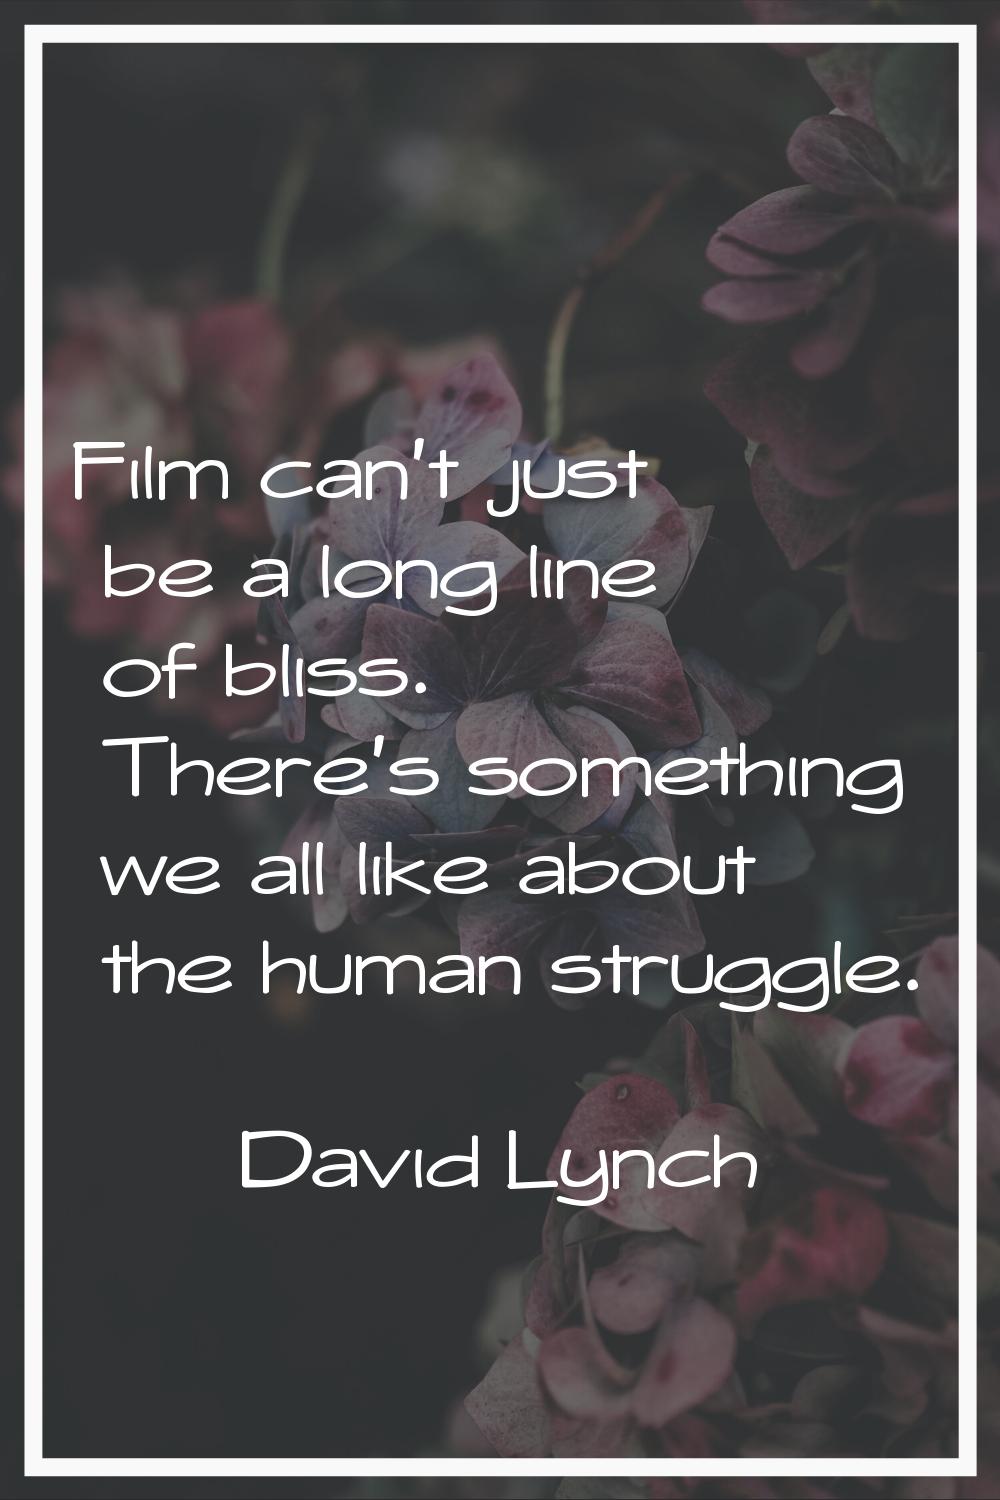 Film can't just be a long line of bliss. There's something we all like about the human struggle.